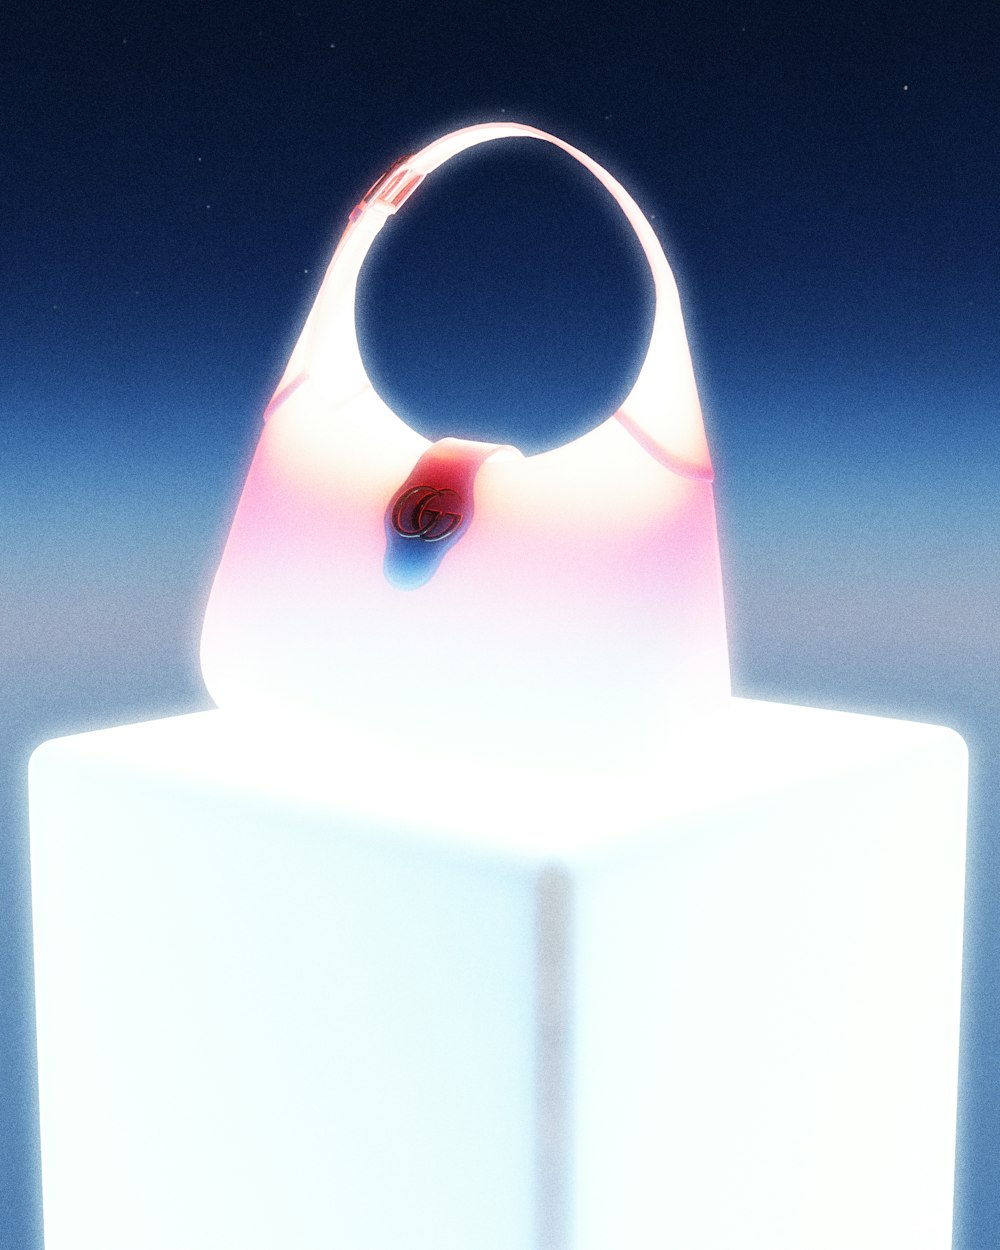 a white object with a red object on top of it